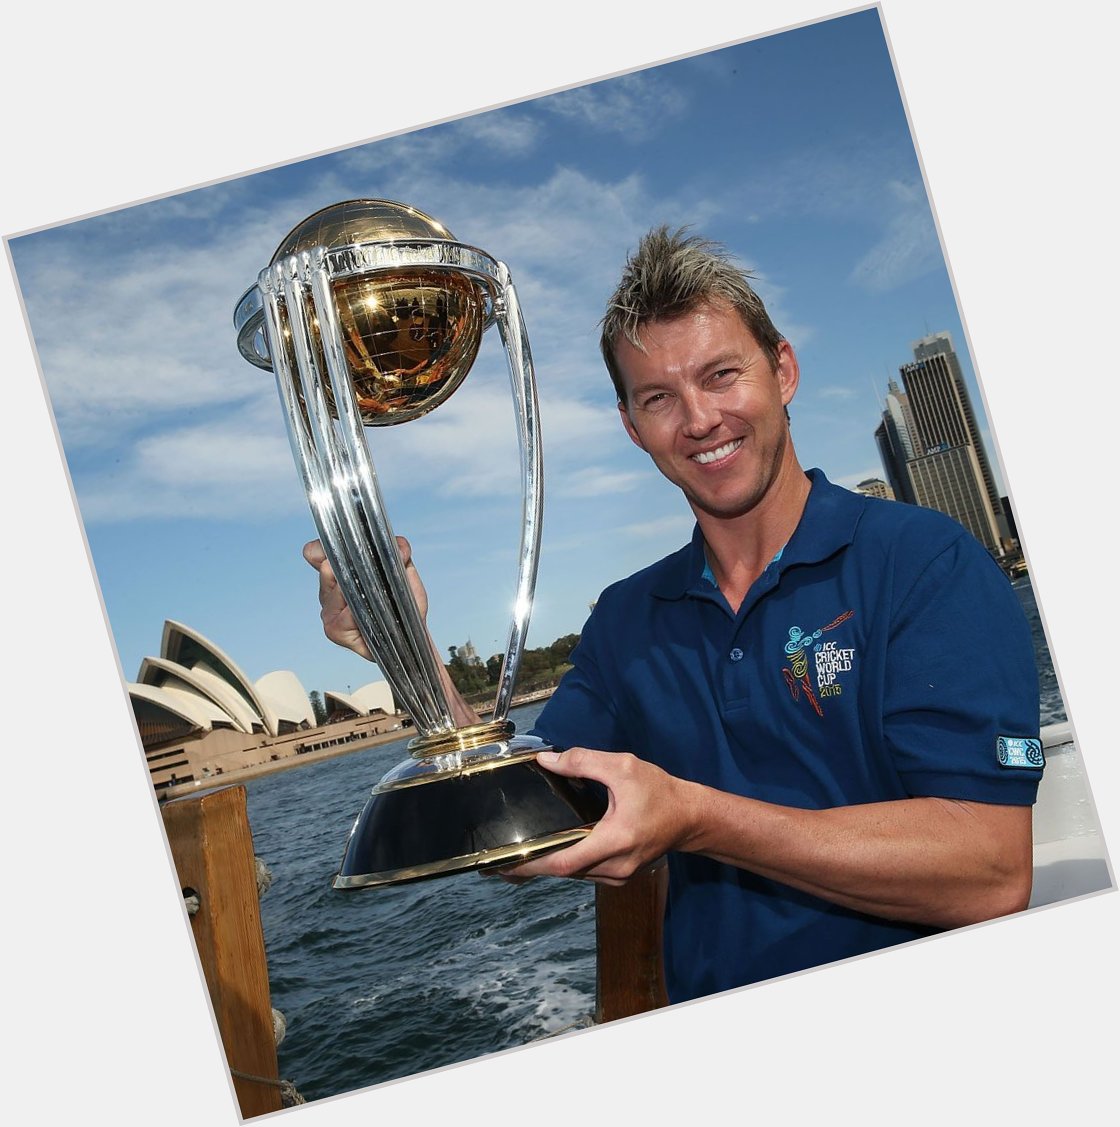 Happy birthday to one of cricket\s fastest bowlers: Brett Lee! 